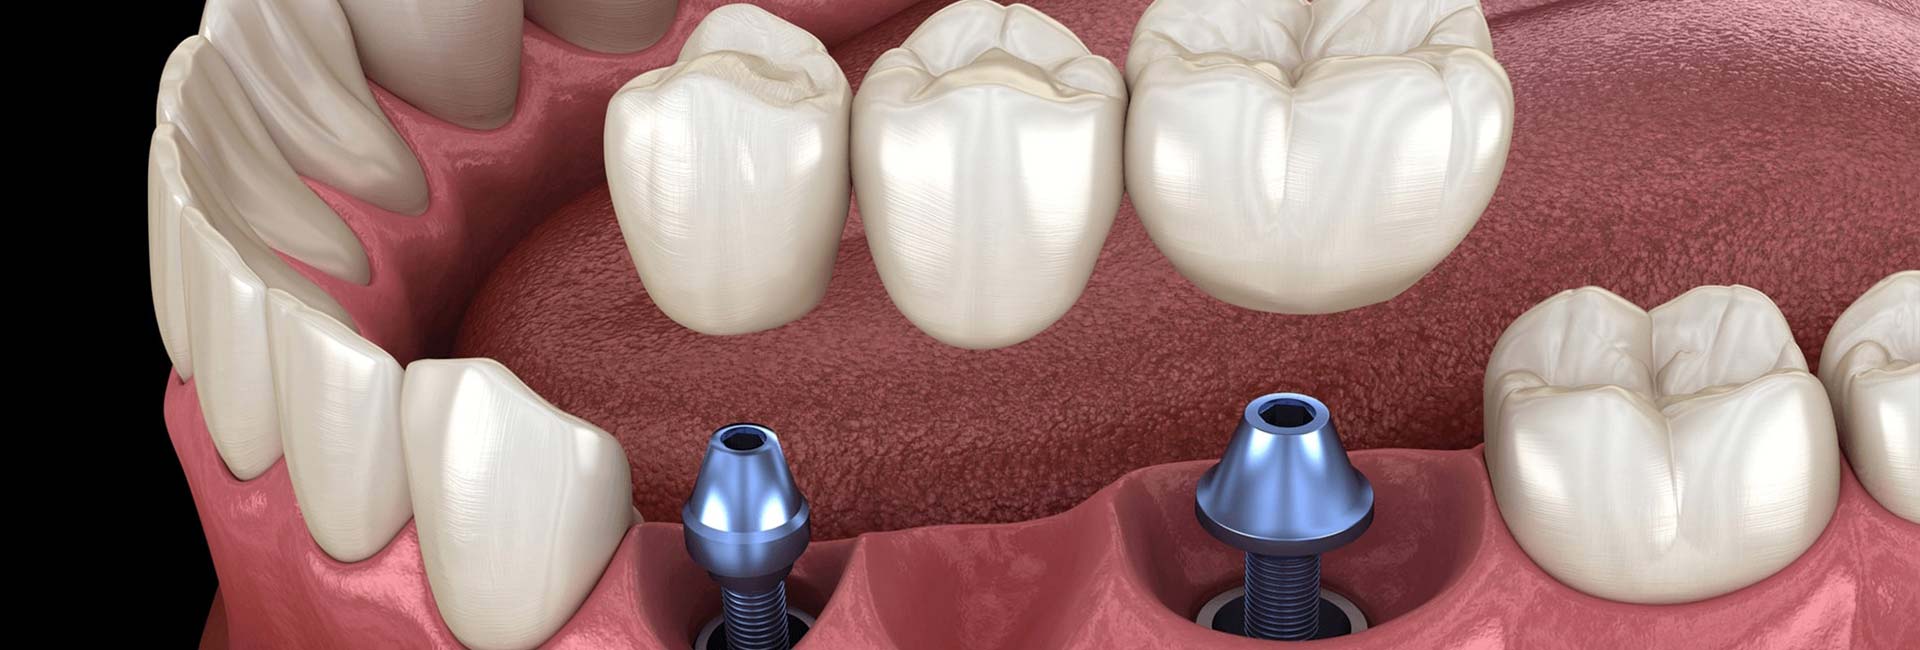 Single and multiple implant placement